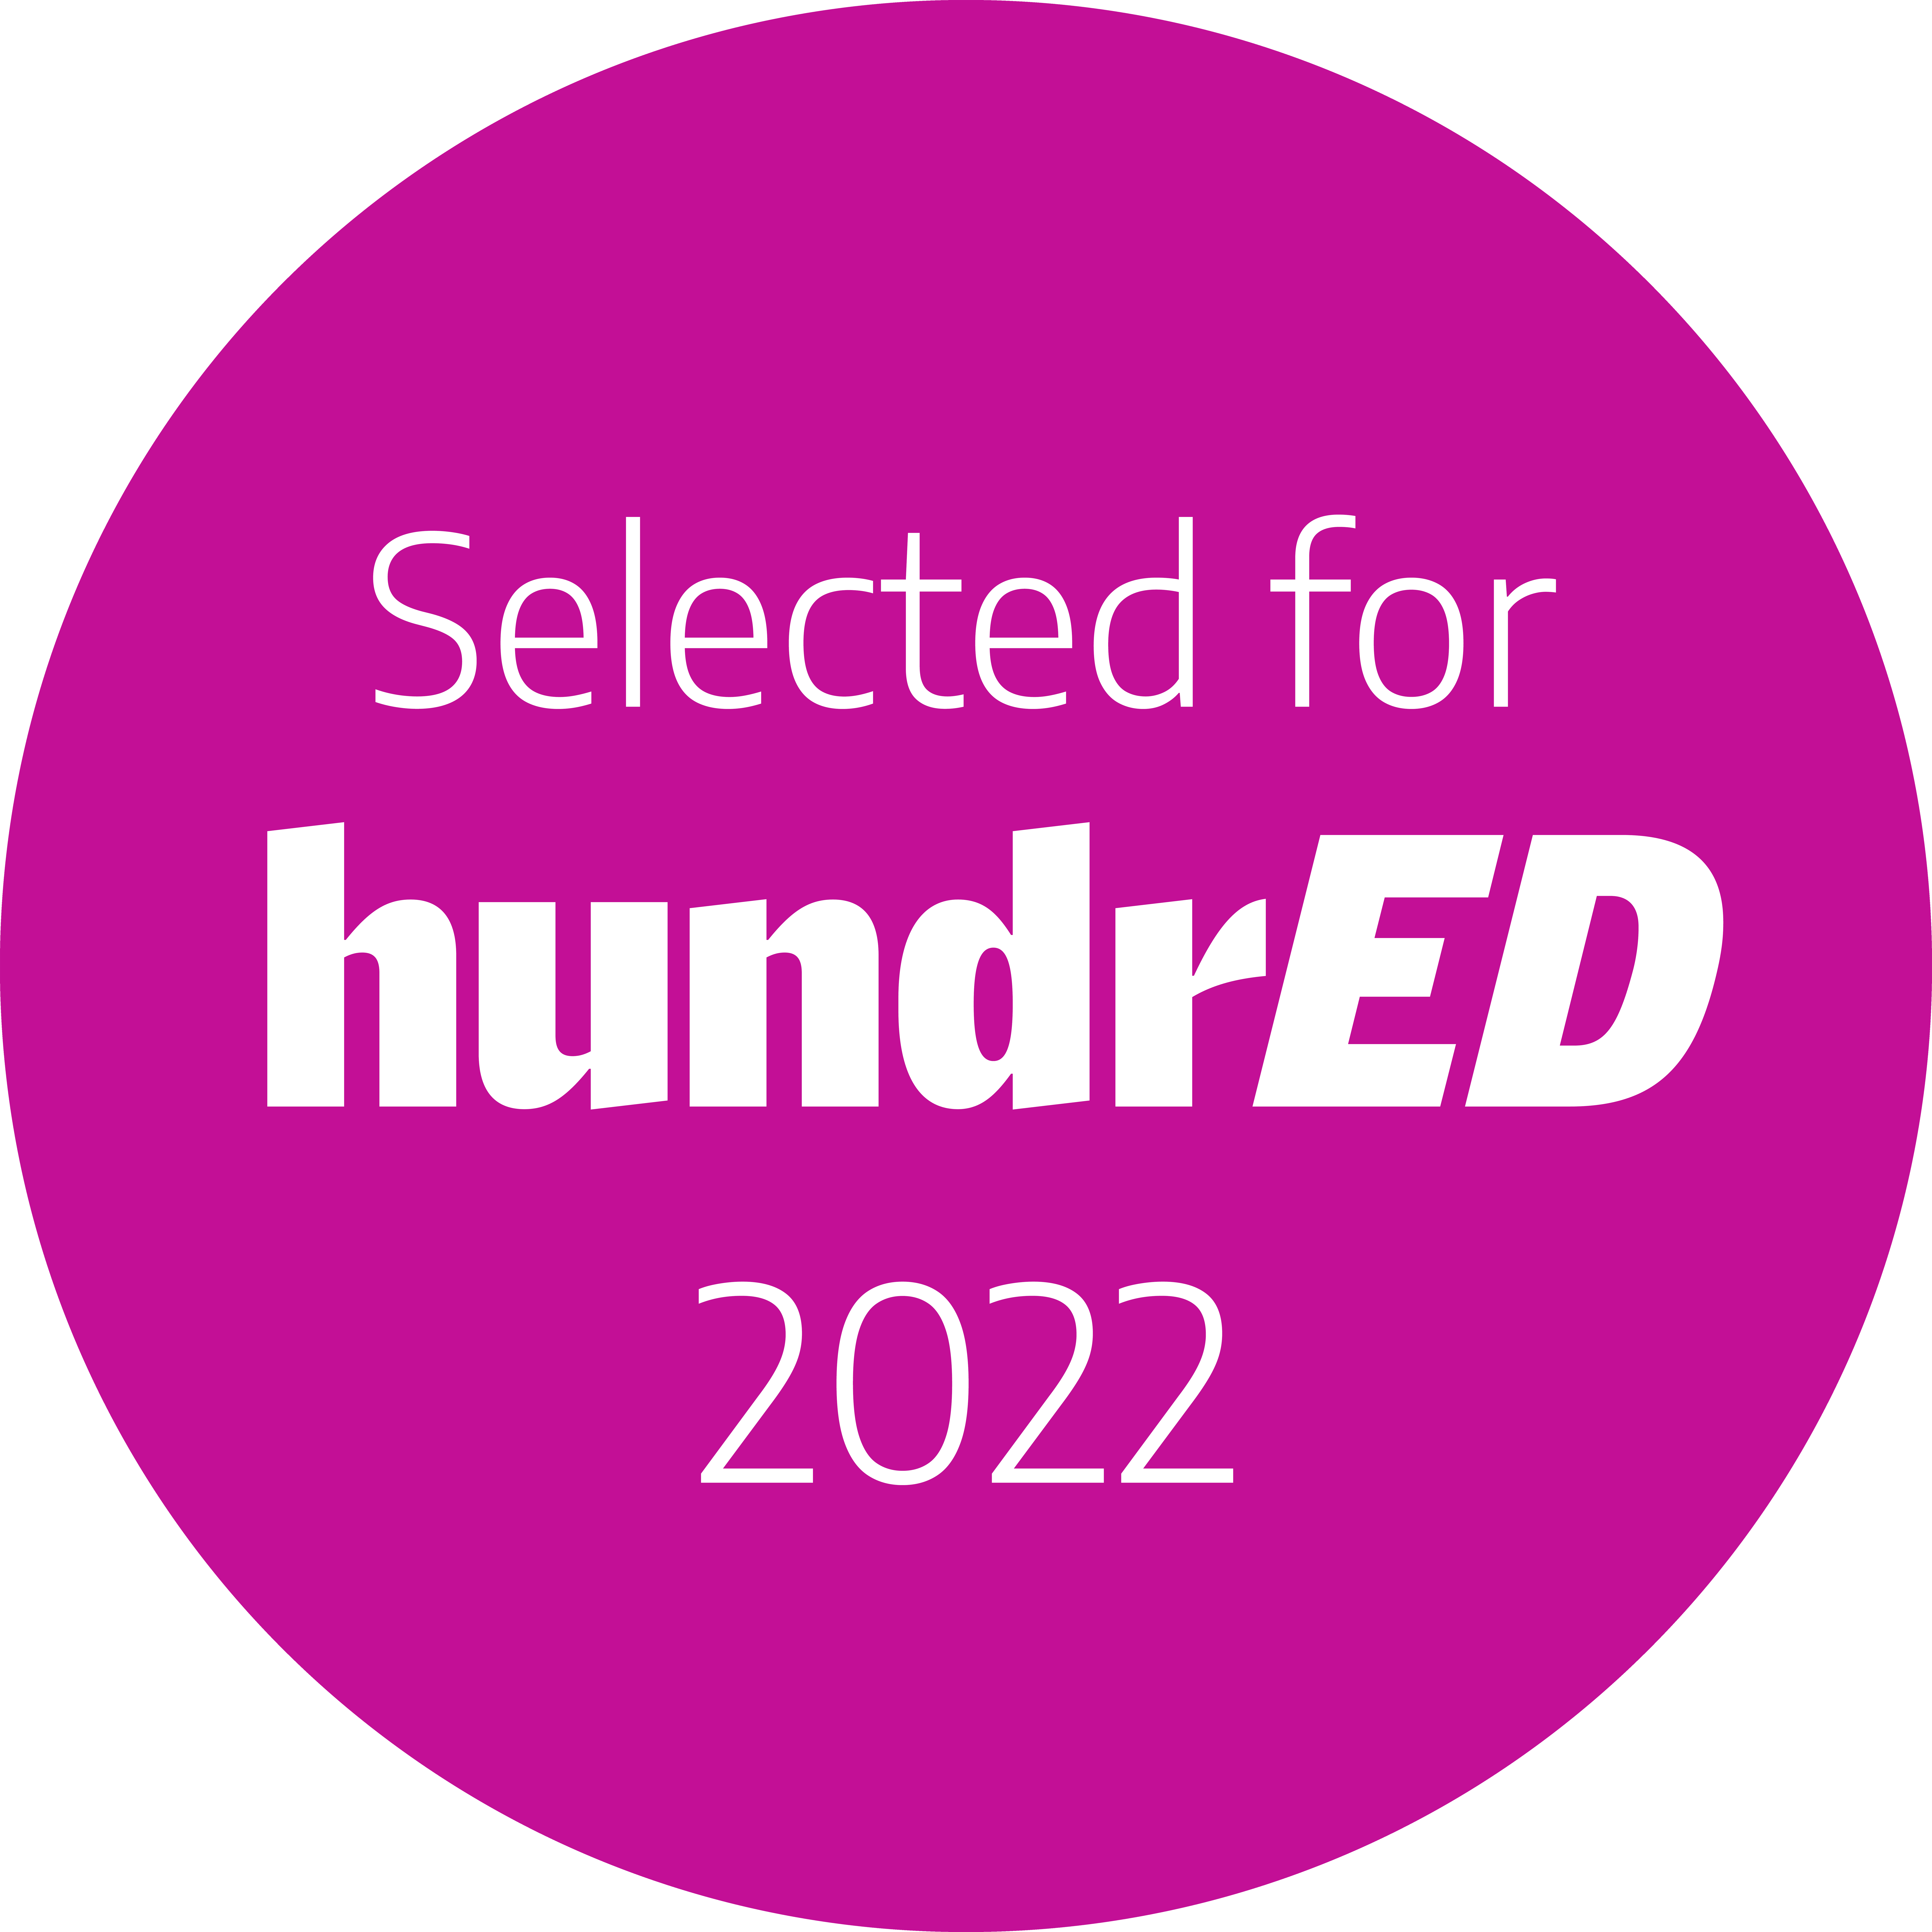 Selected for hundrED 2022